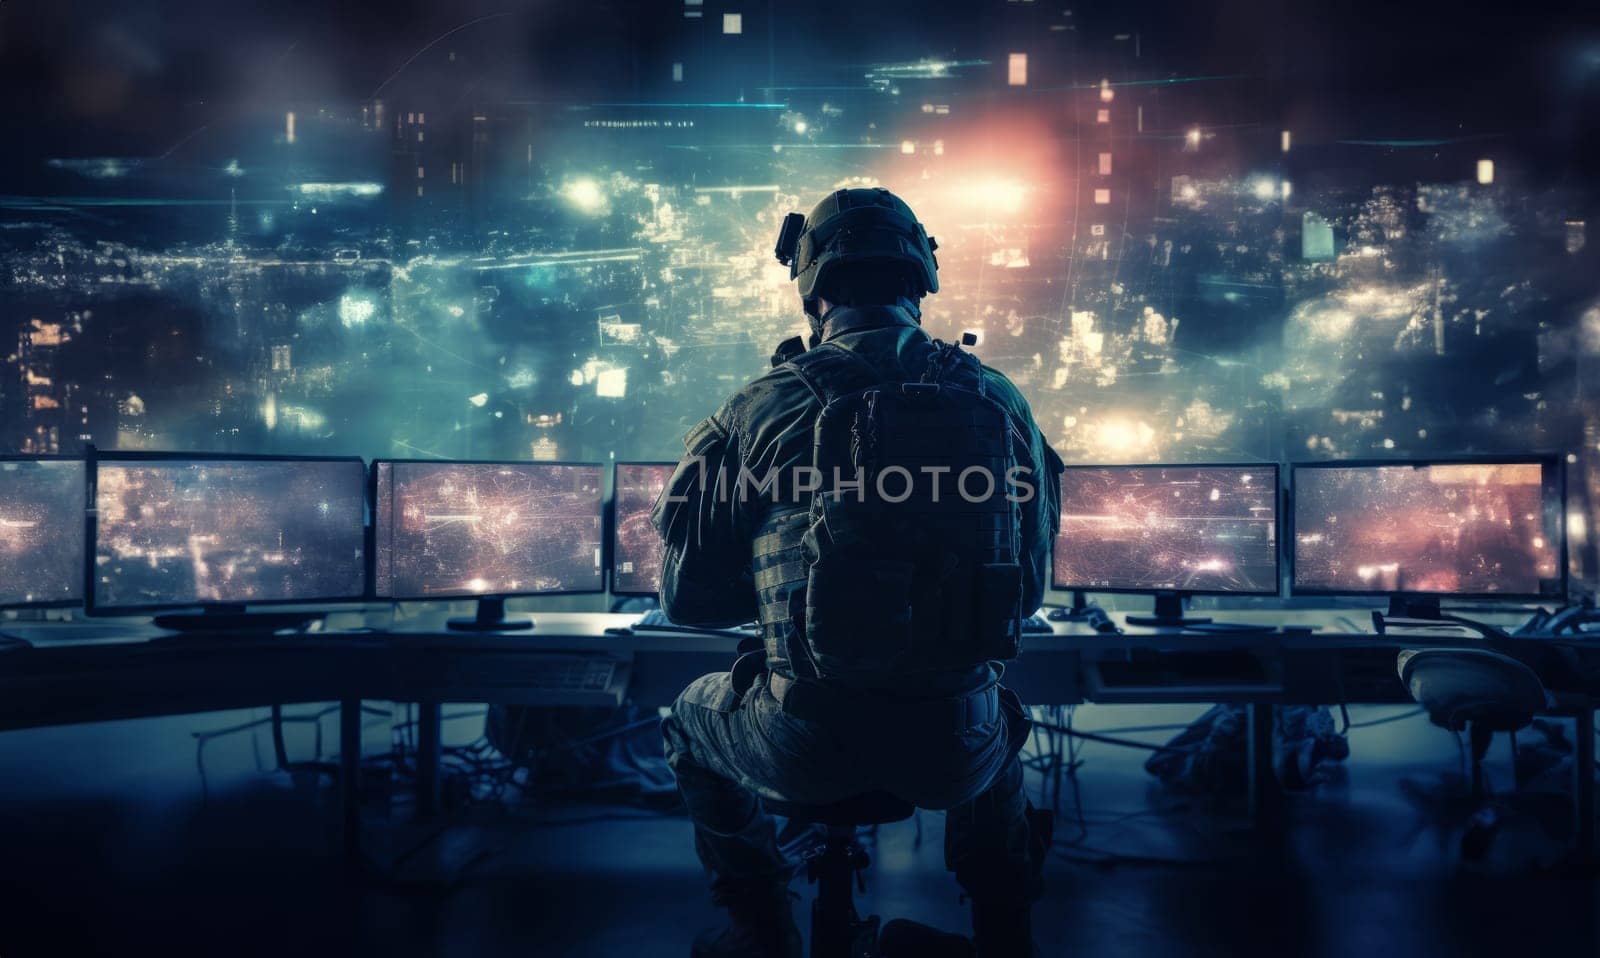 Techno-Warfare Professional Soldier Engaged with Combat Holograms on Computer.Generated image by dotshock